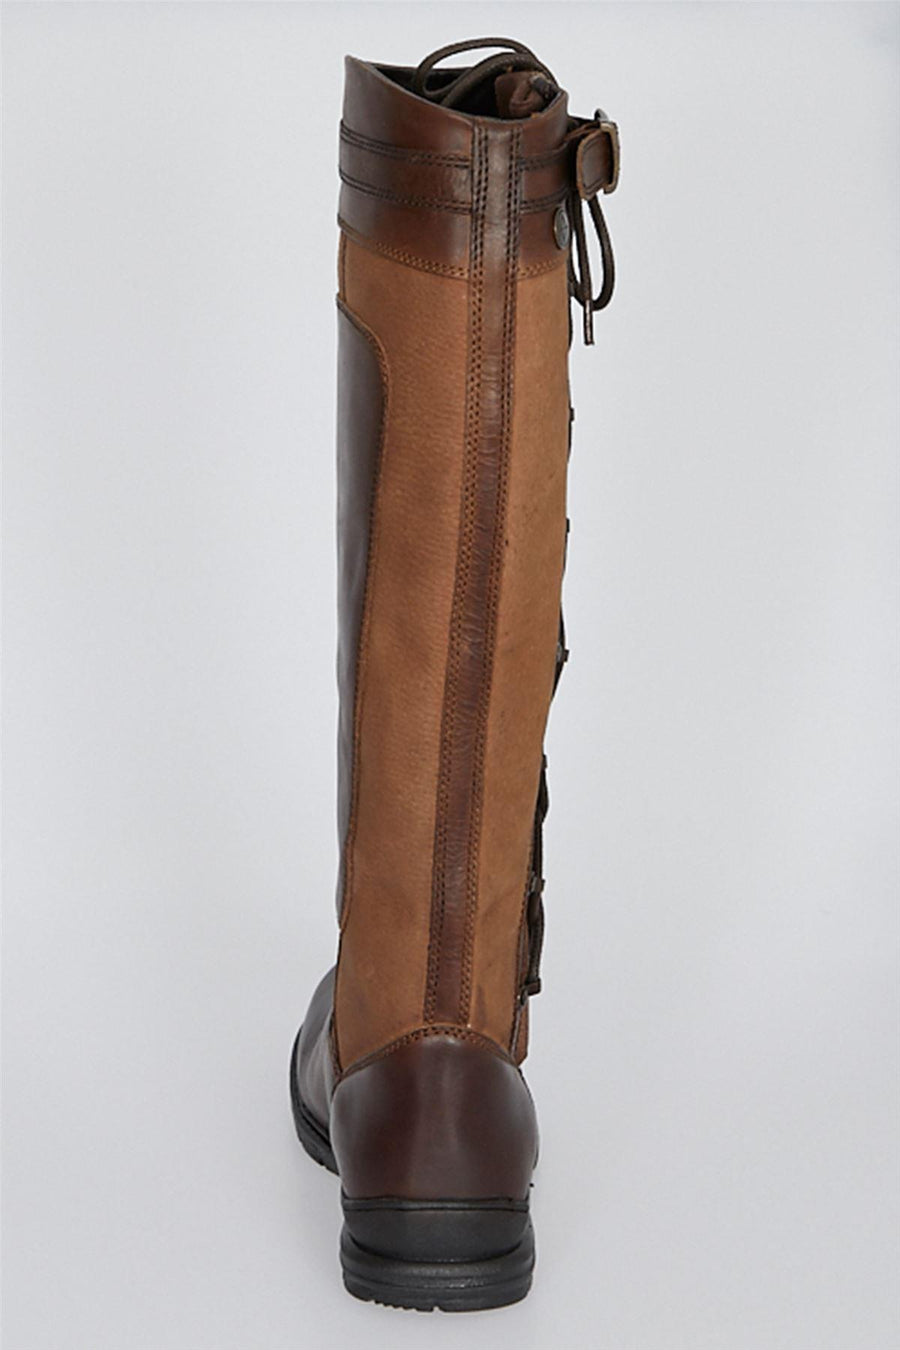 Bow & Arrow Kingston Country Boots BROWN